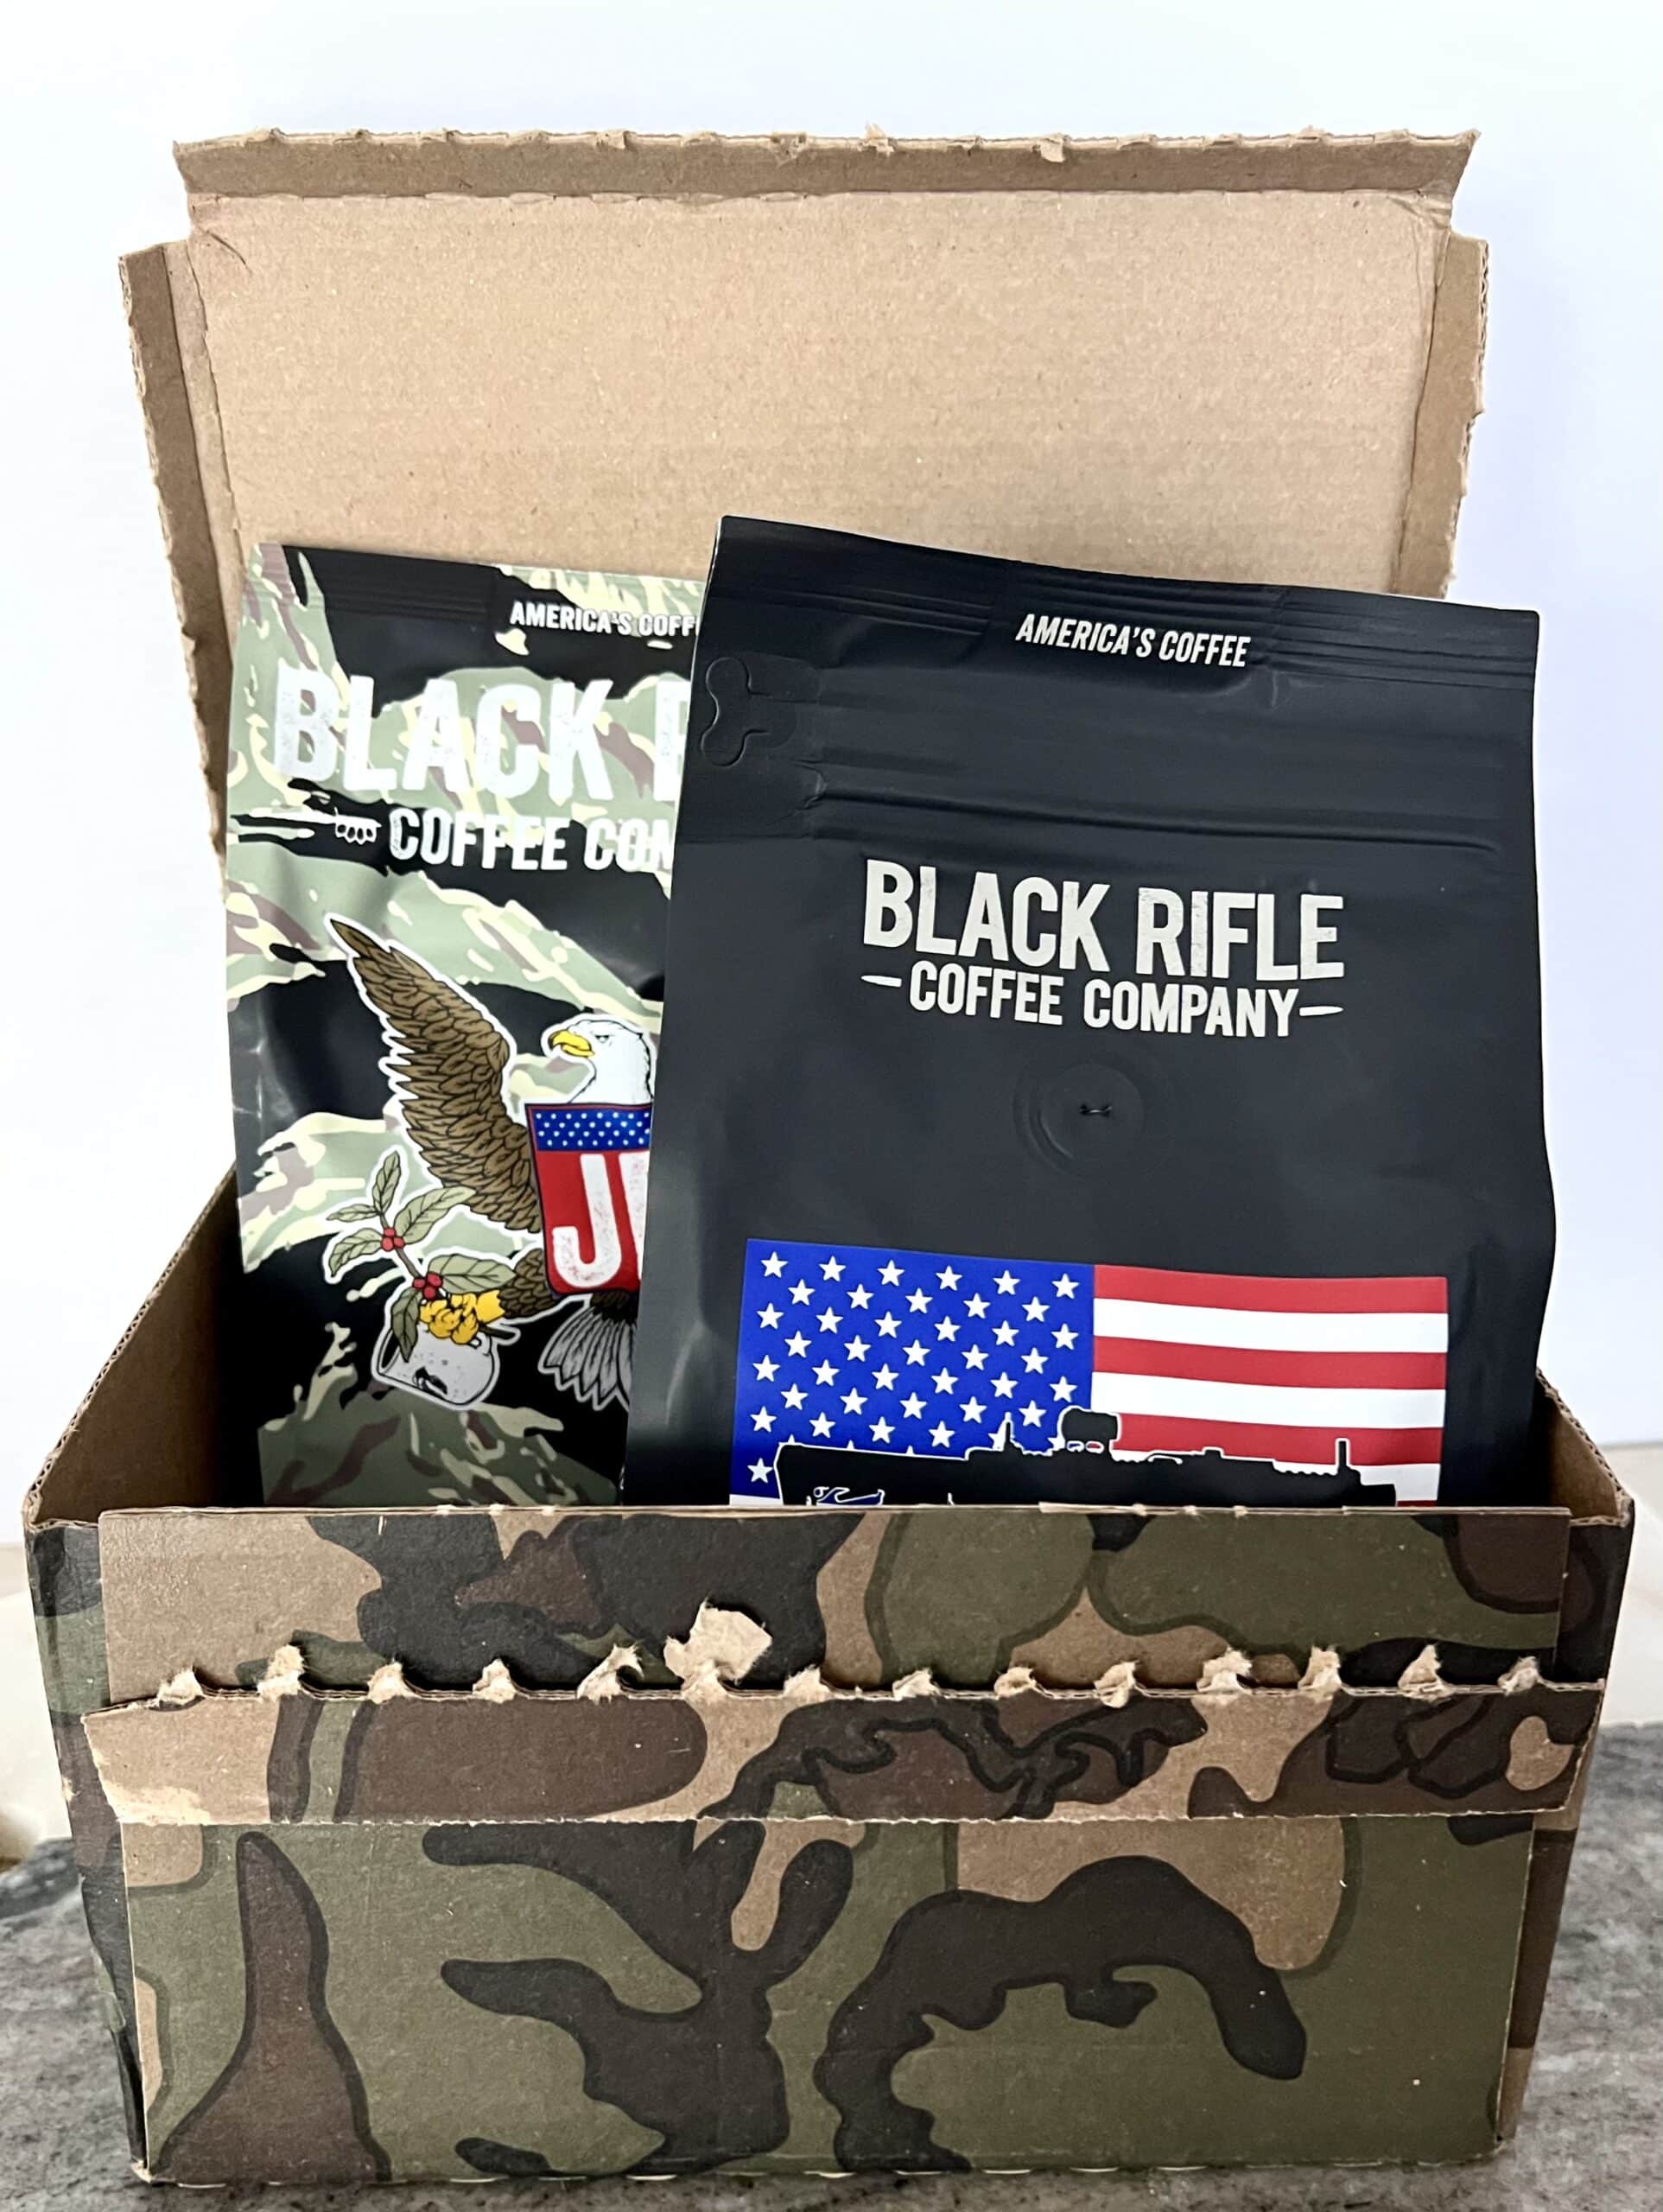 Two different packs of Black Rifle Coffee in an open shipping box